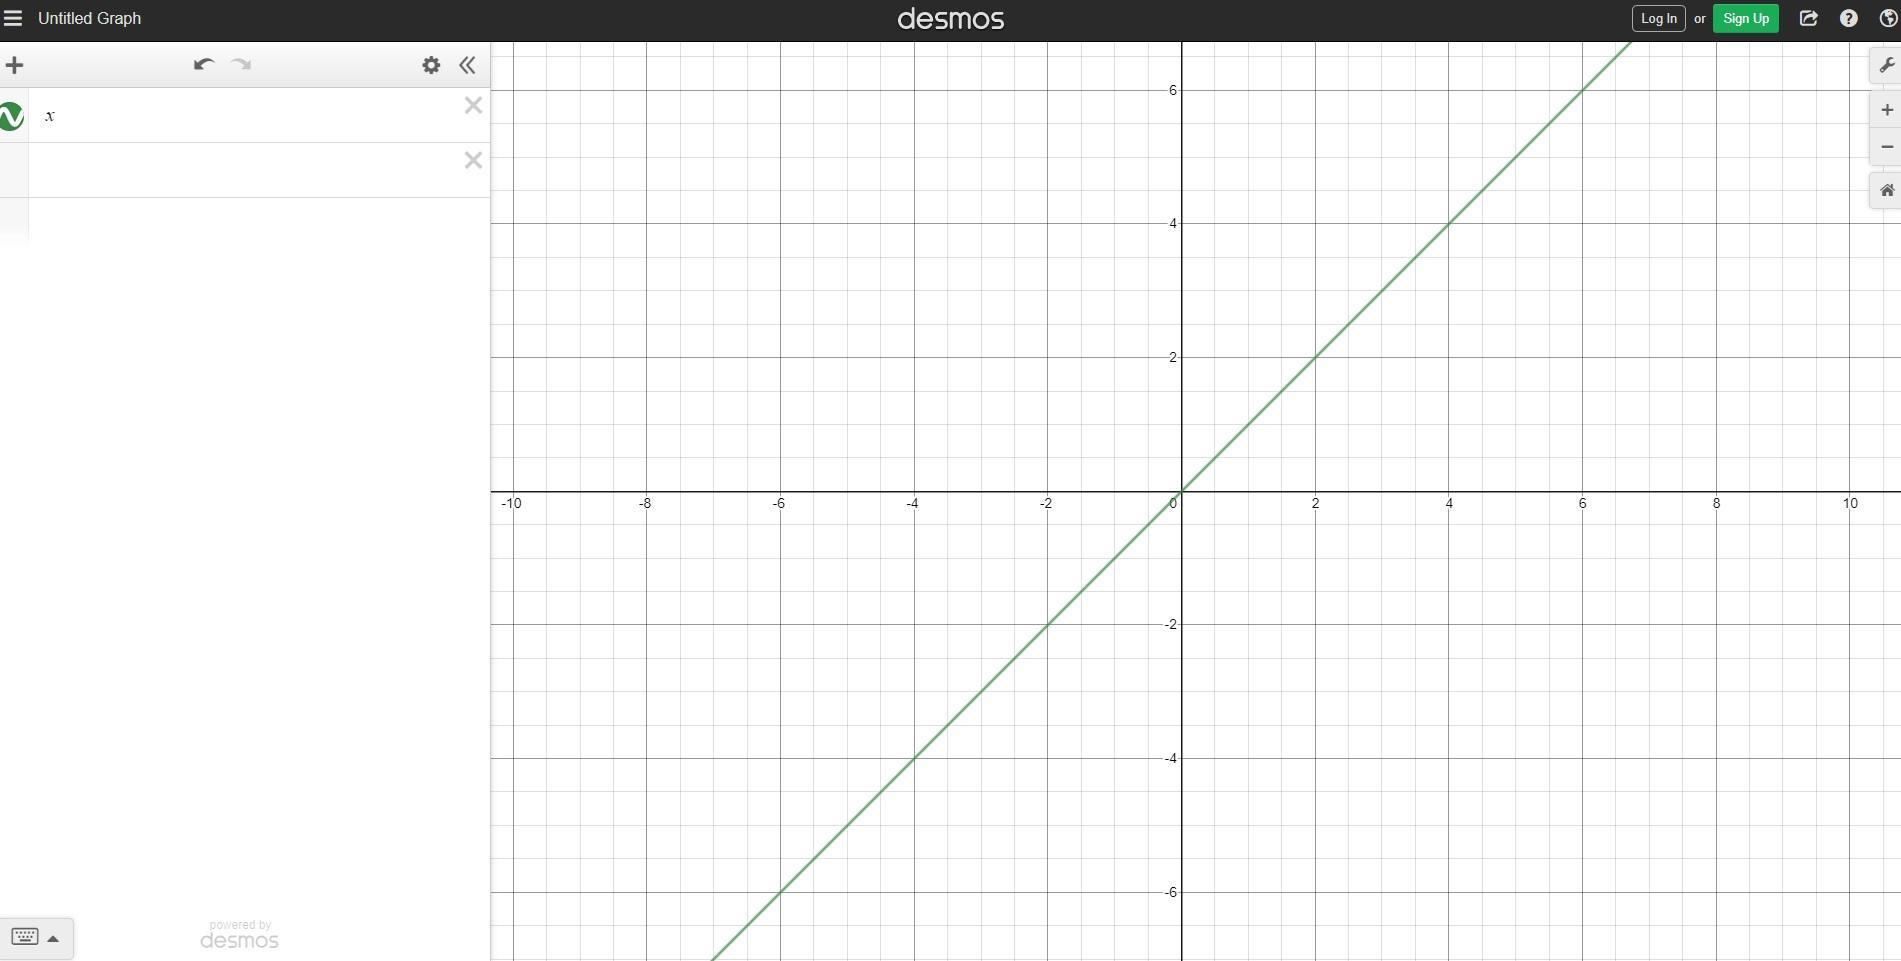 What Is A Slope Of A Line Between The X-axis And Y-axis